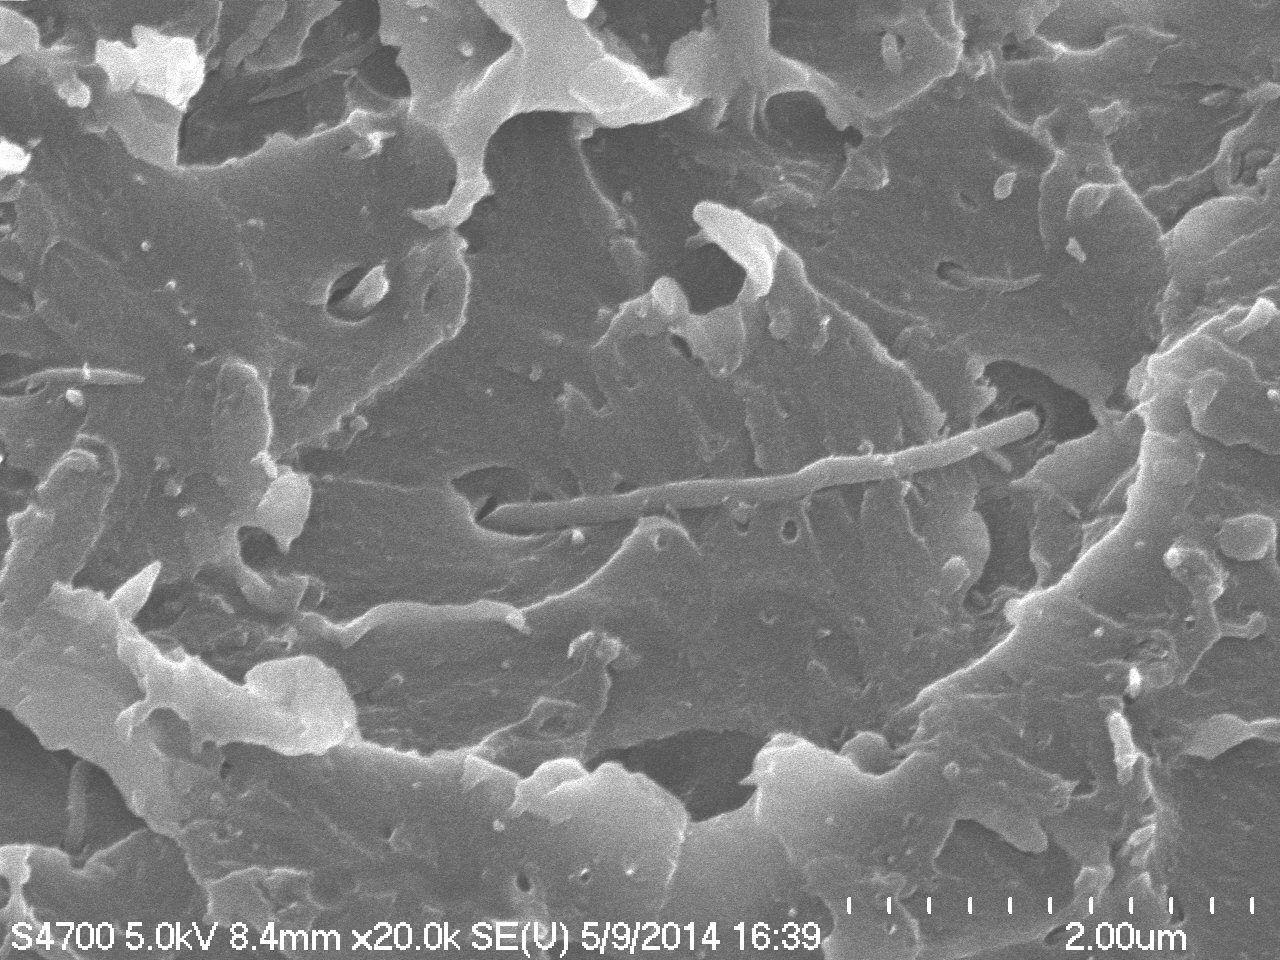 New Ultra-Strong Polymer Reinforced with Carbon Nanotubes